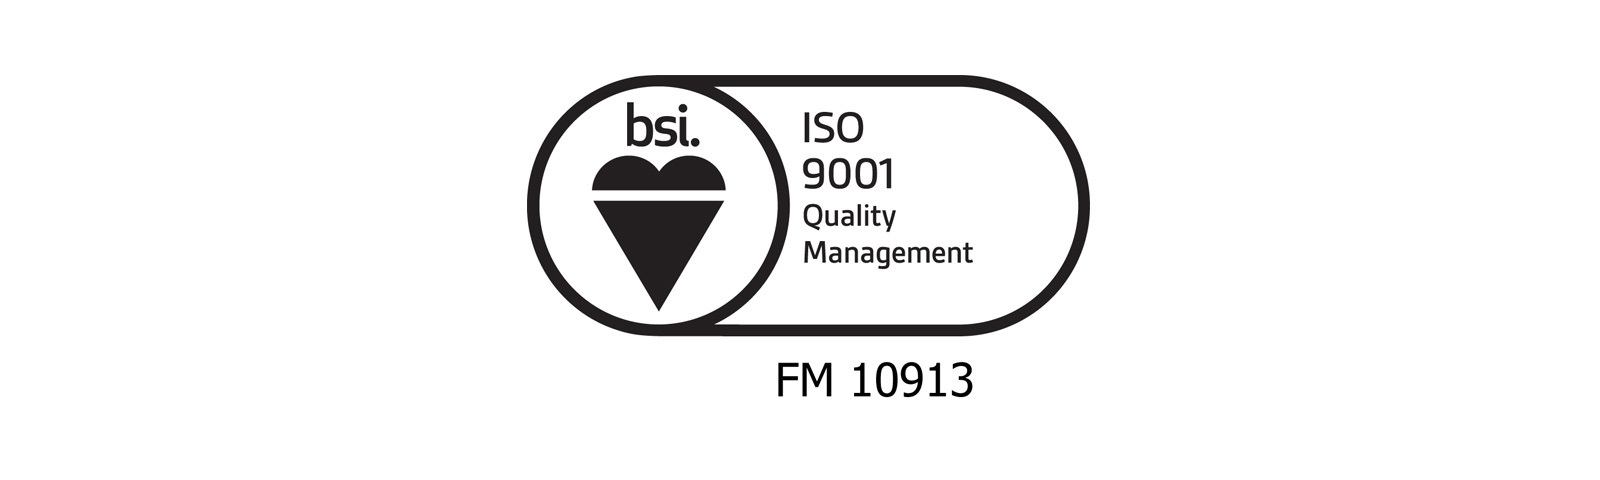 Thorlux Quality Certification Upgraded to ISO 9001:2015